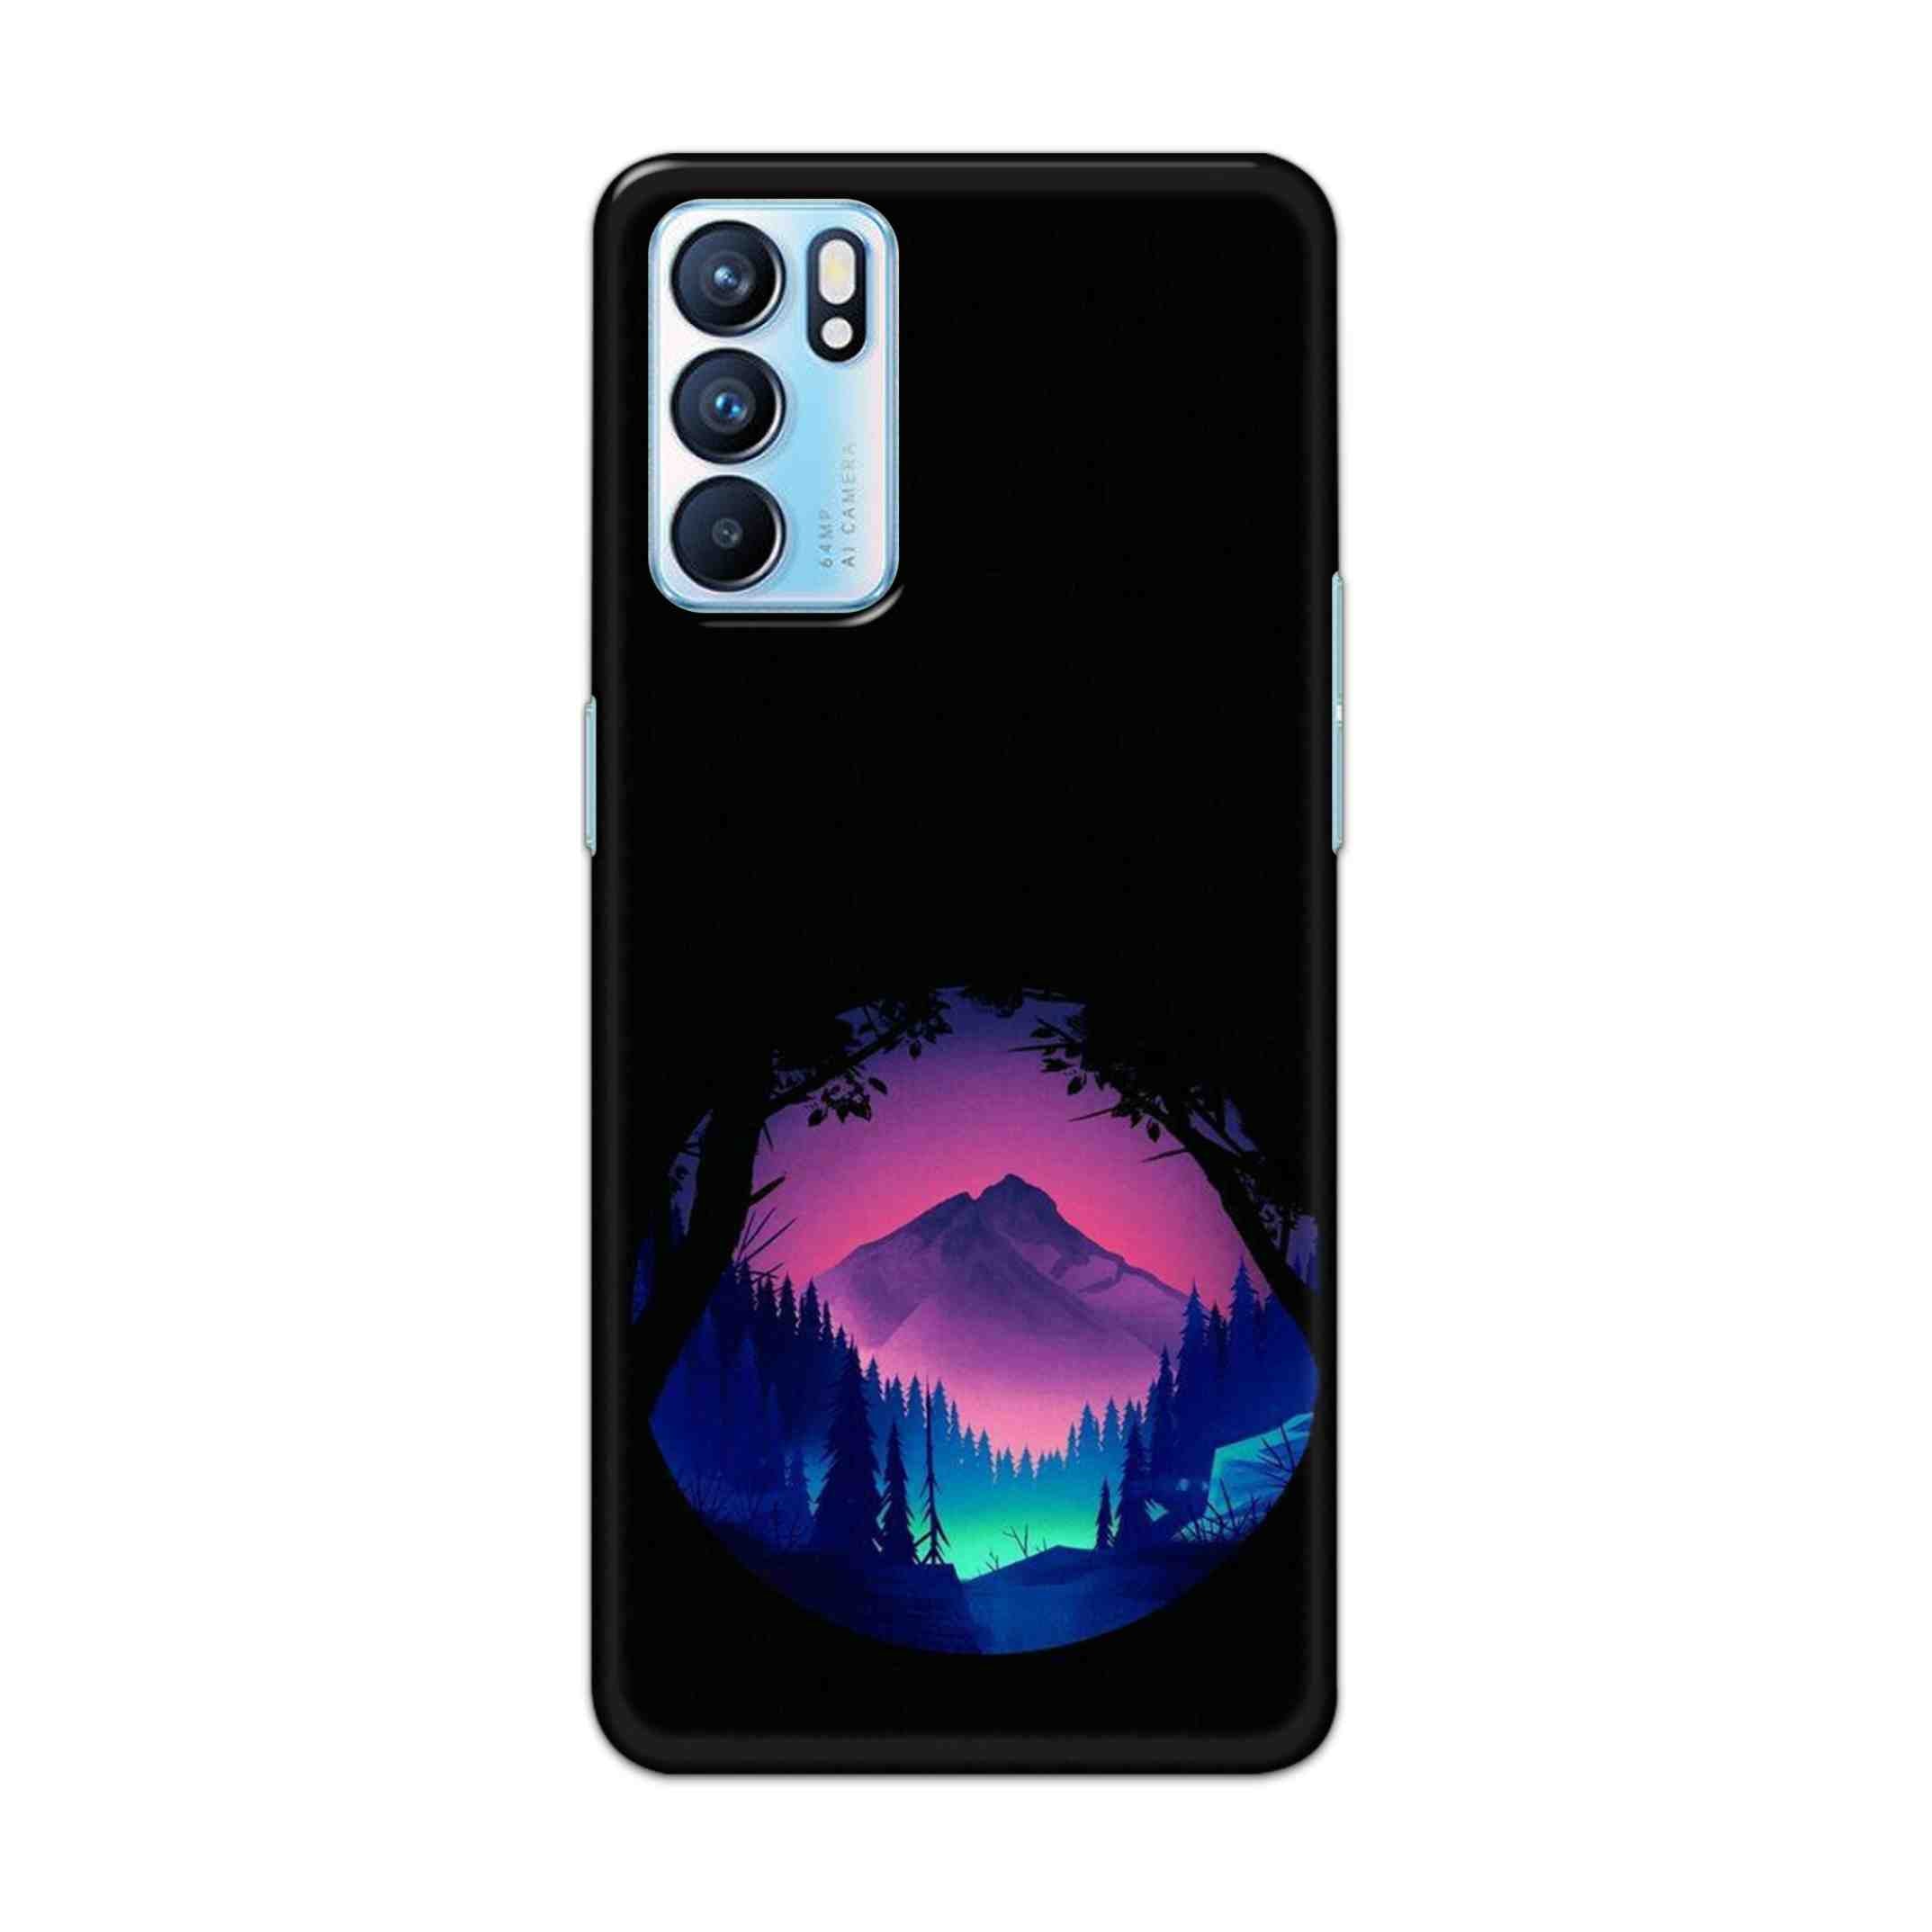 Buy Neon Tables Hard Back Mobile Phone Case Cover For OPPO RENO 6 Online